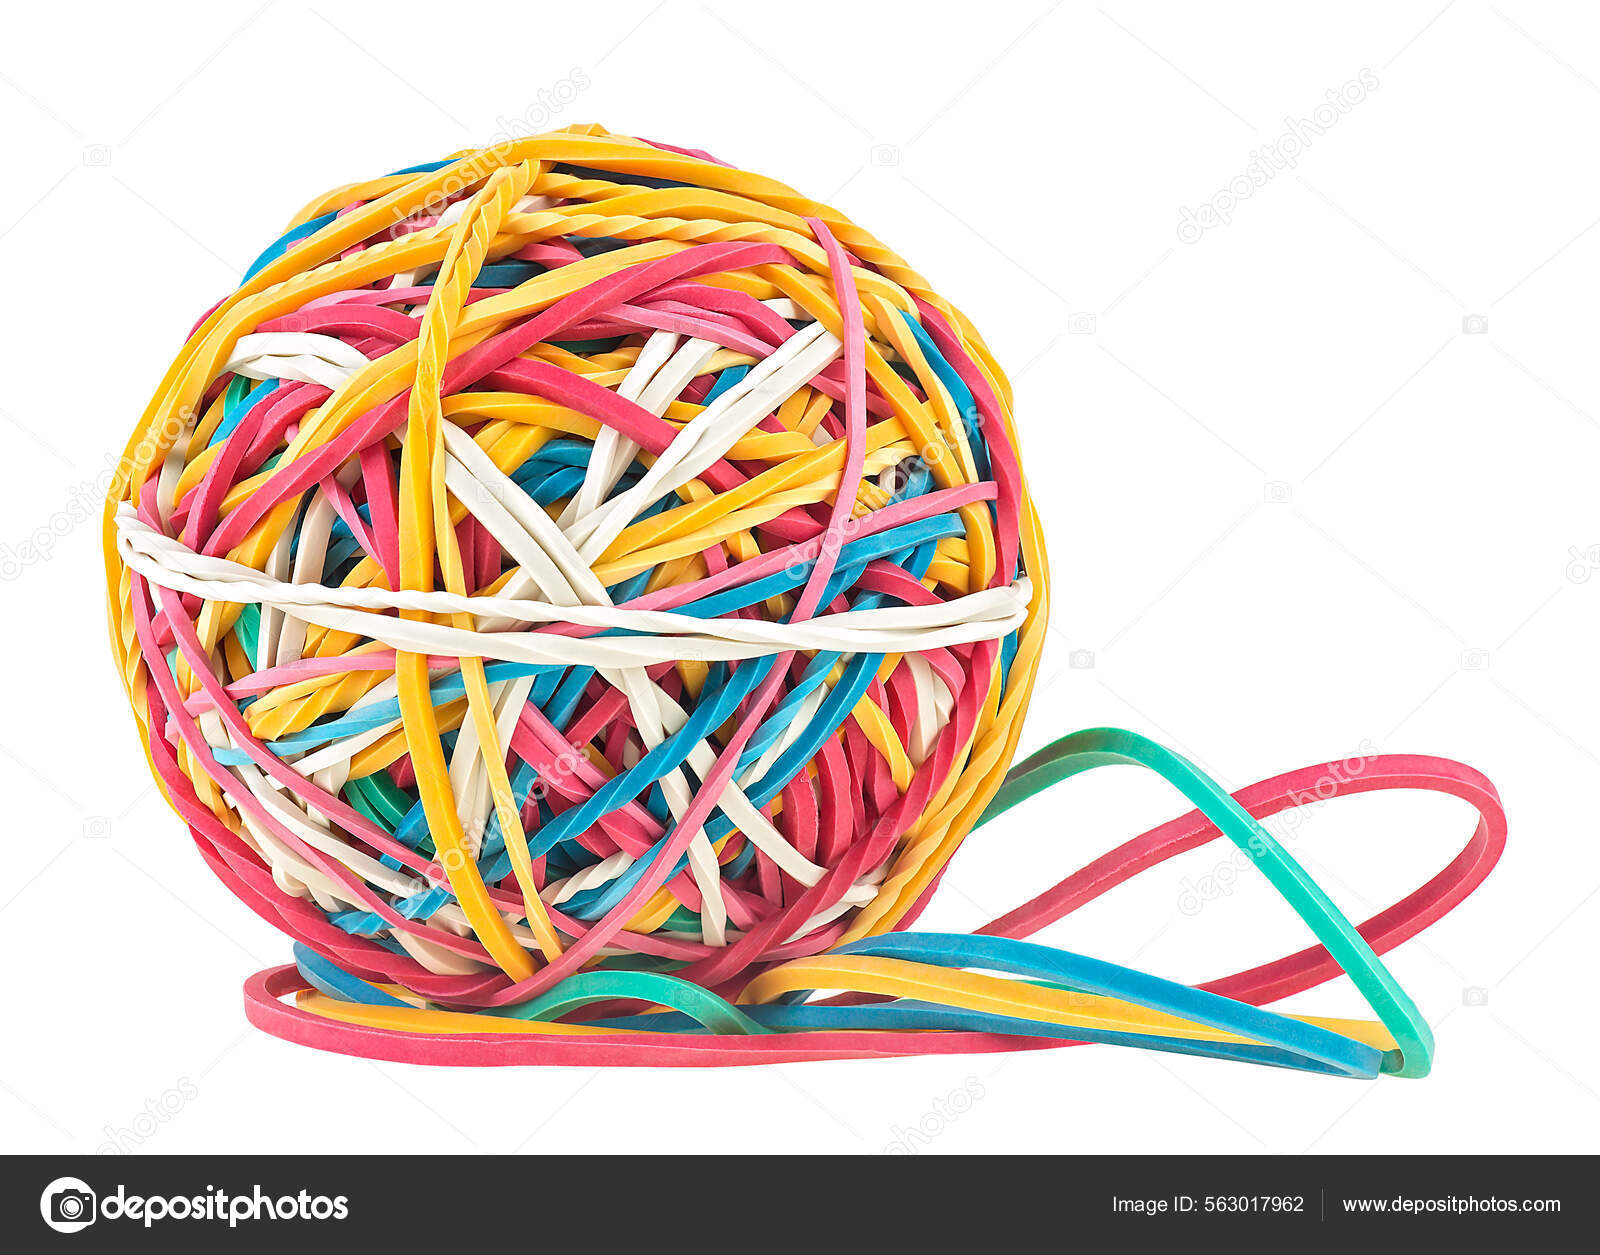 a lot of colored rubber bands on a white background, Stock image